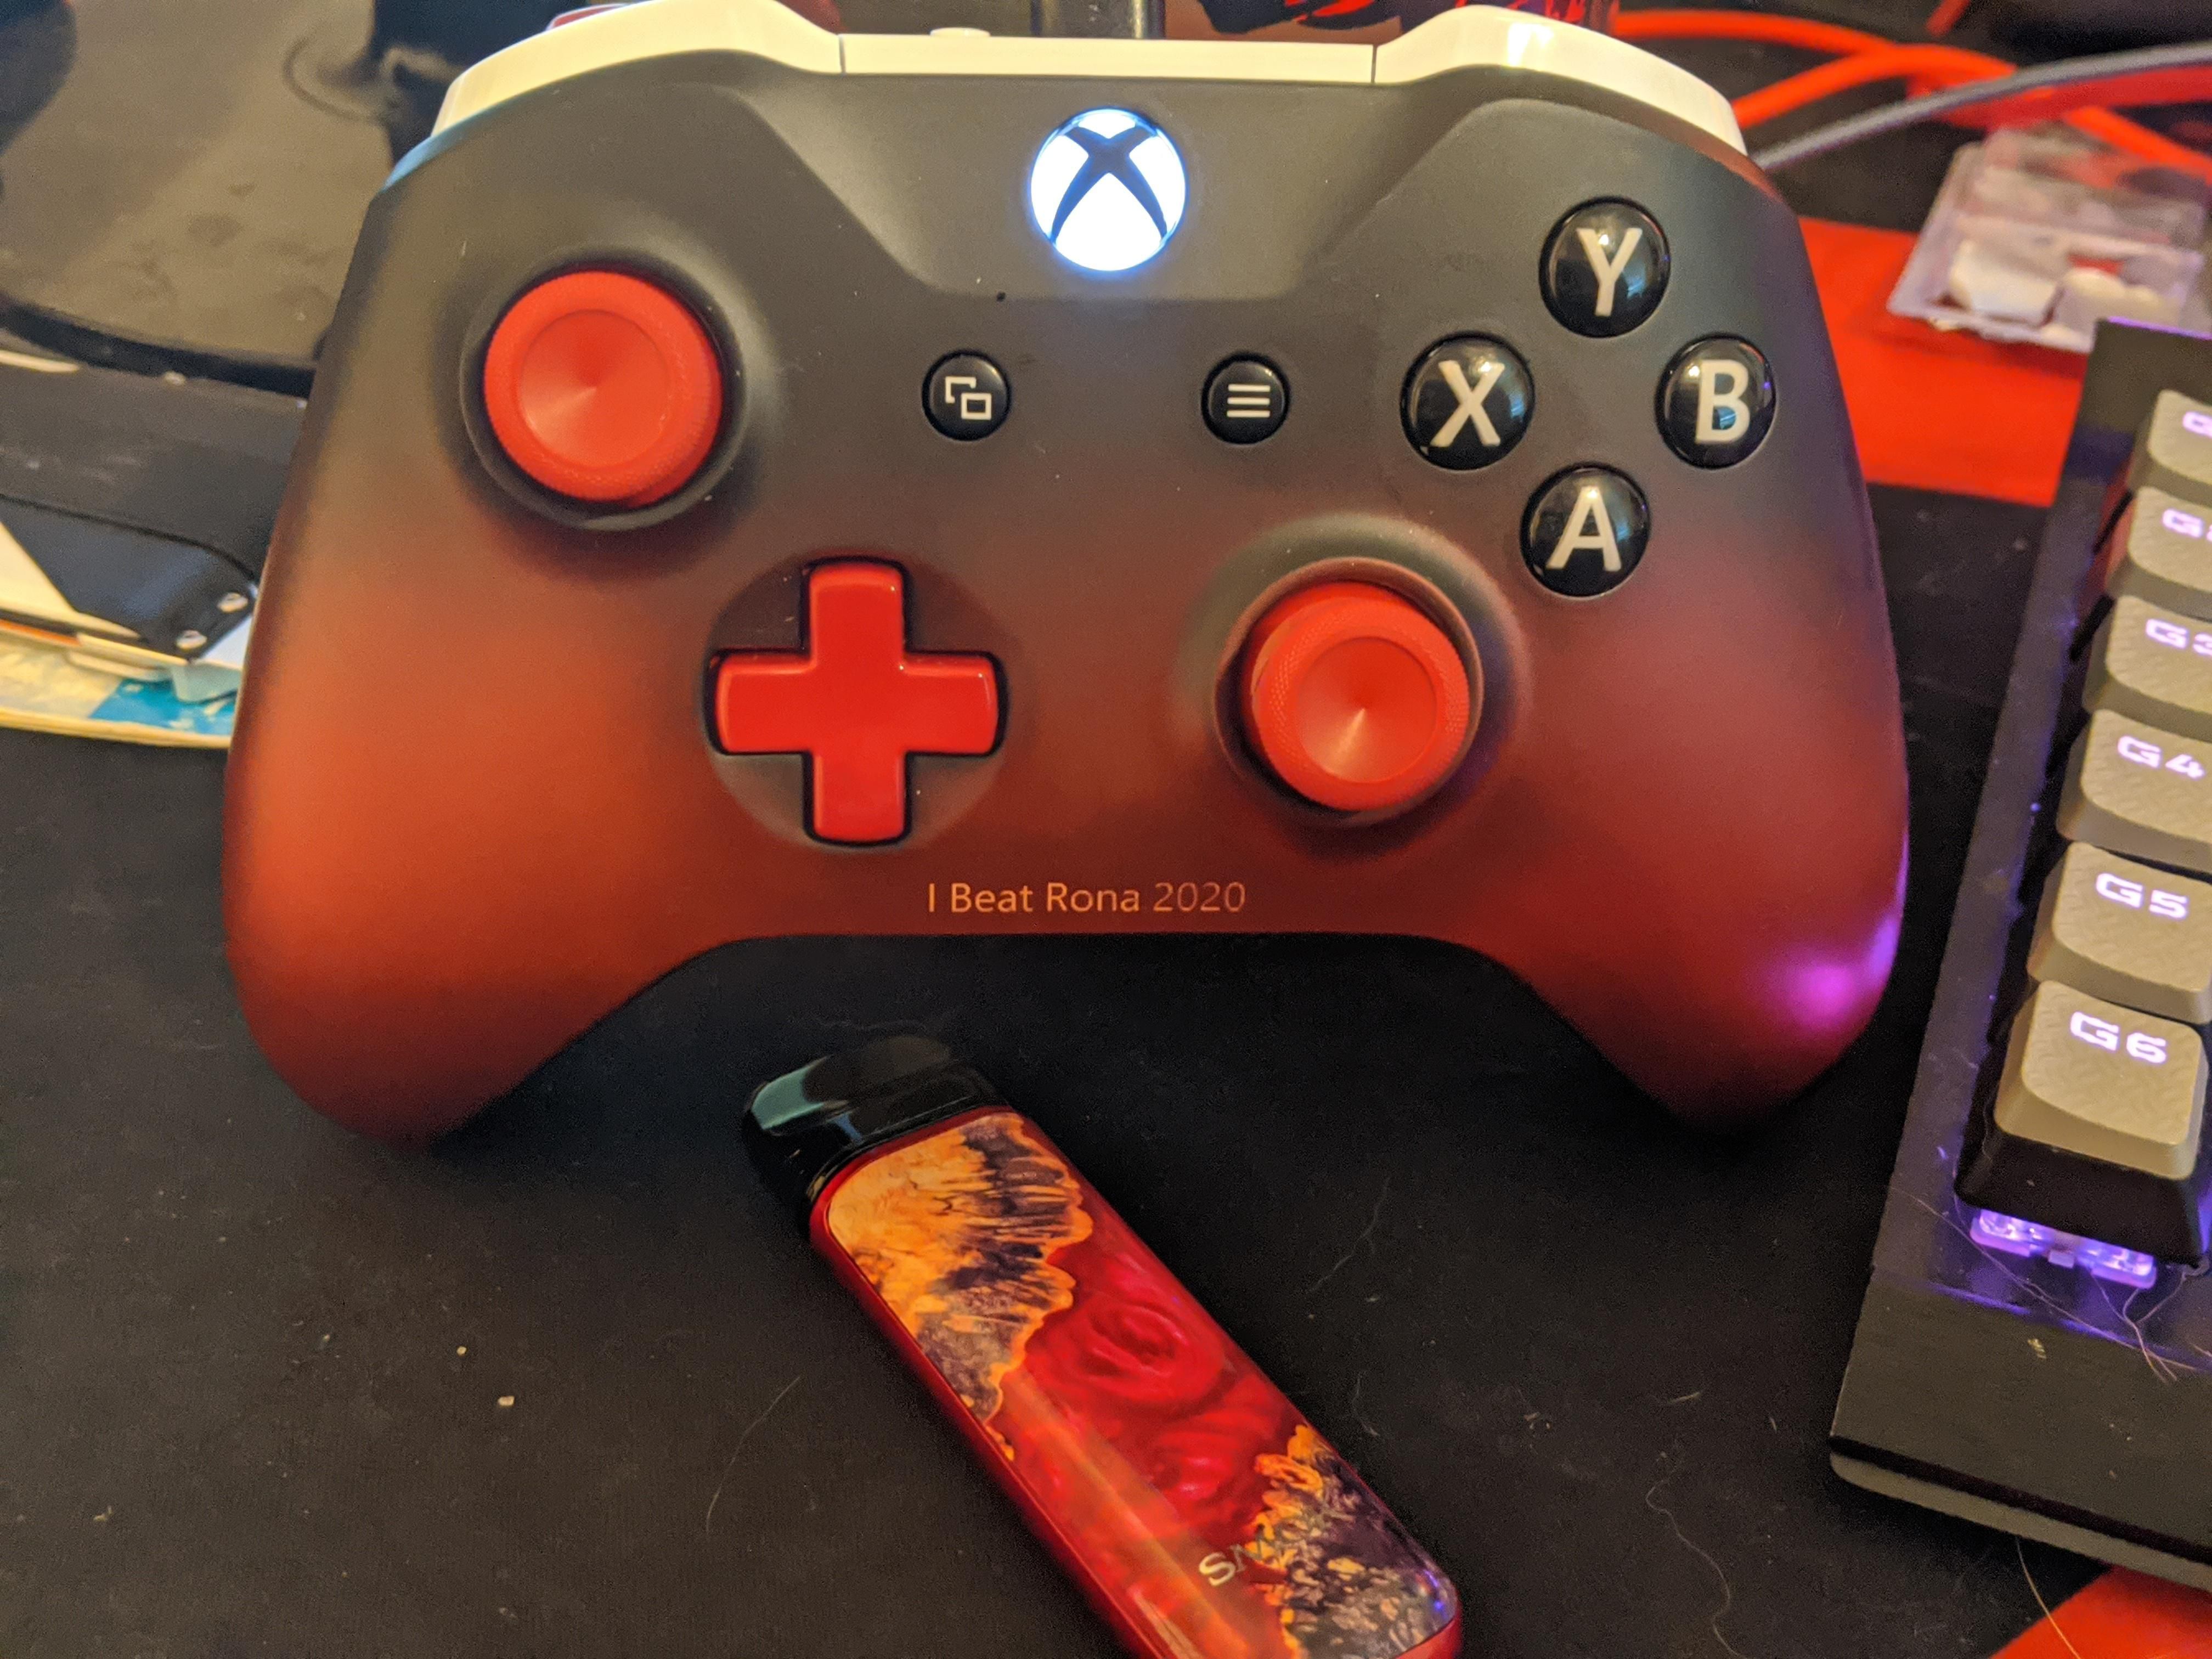 I got COVID this year. This is the controller my mom made me for my birthday